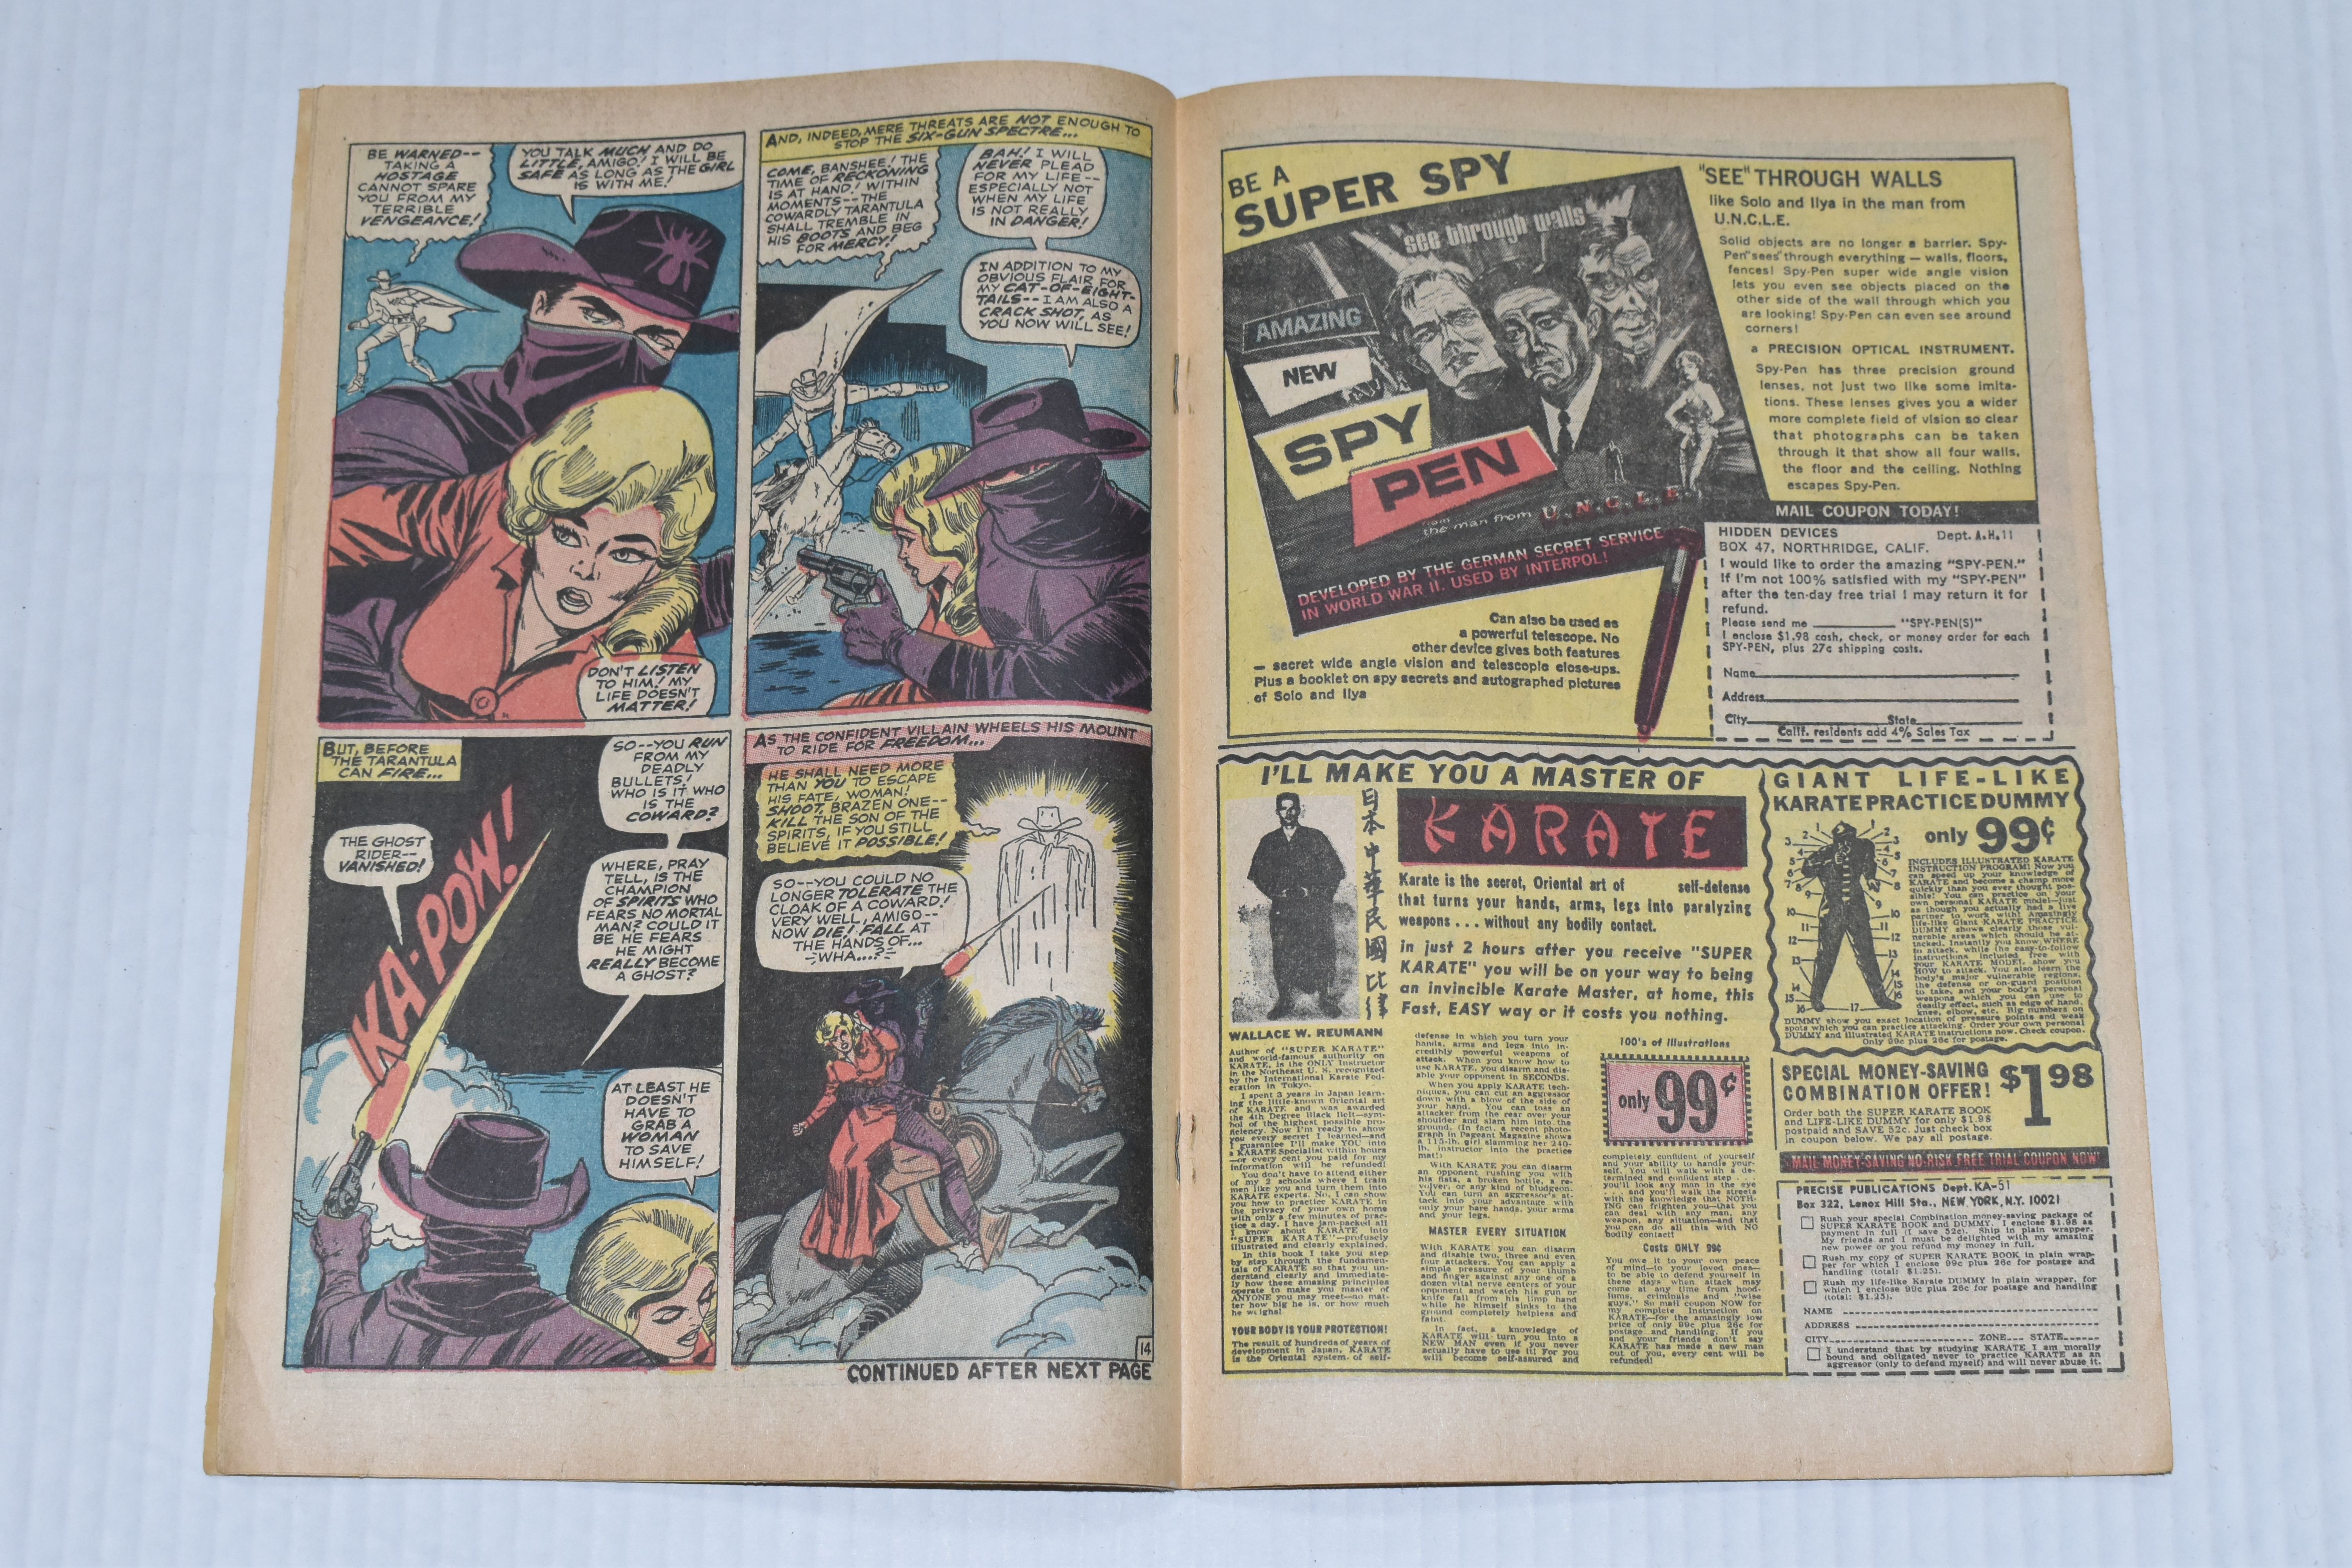 COMPLETE ORIGINAL GHOST RIDER VOLUME 1 MARVEL COMICS, features the first appearance of the - Image 22 of 25